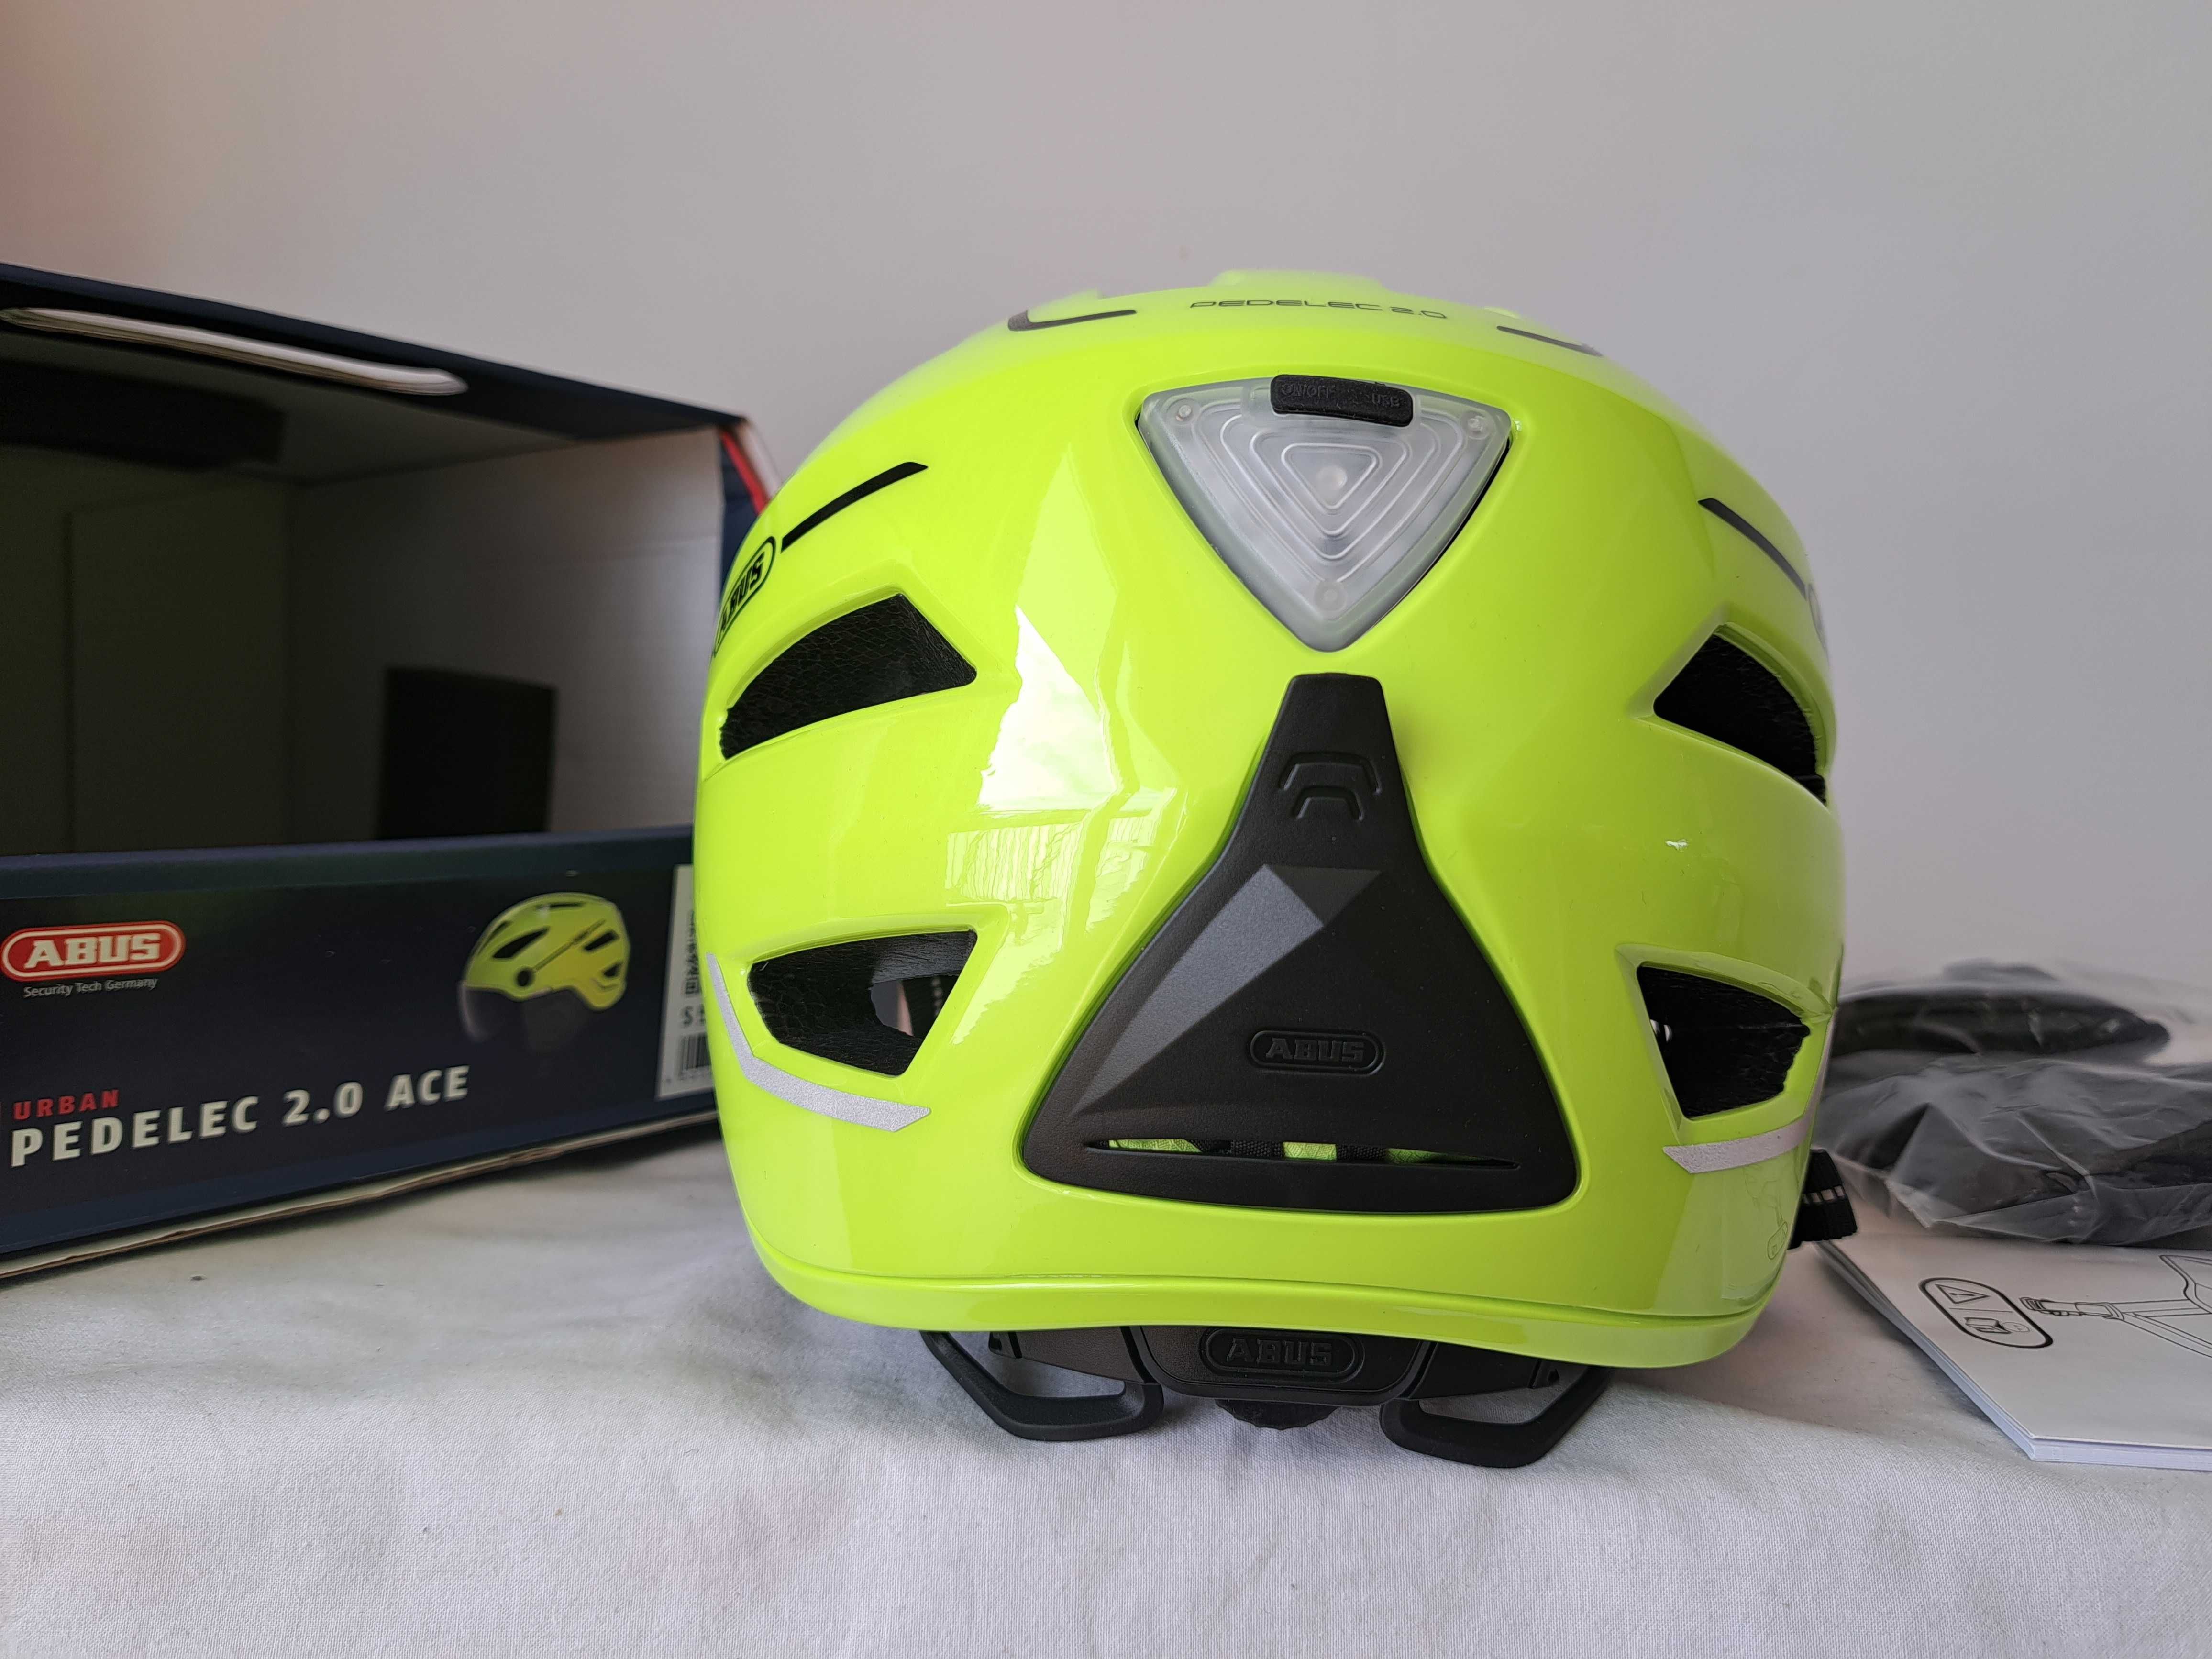 Kask rowerowy Abus Pedelec 2.0 ACE Signal Yellow S 51-55cm